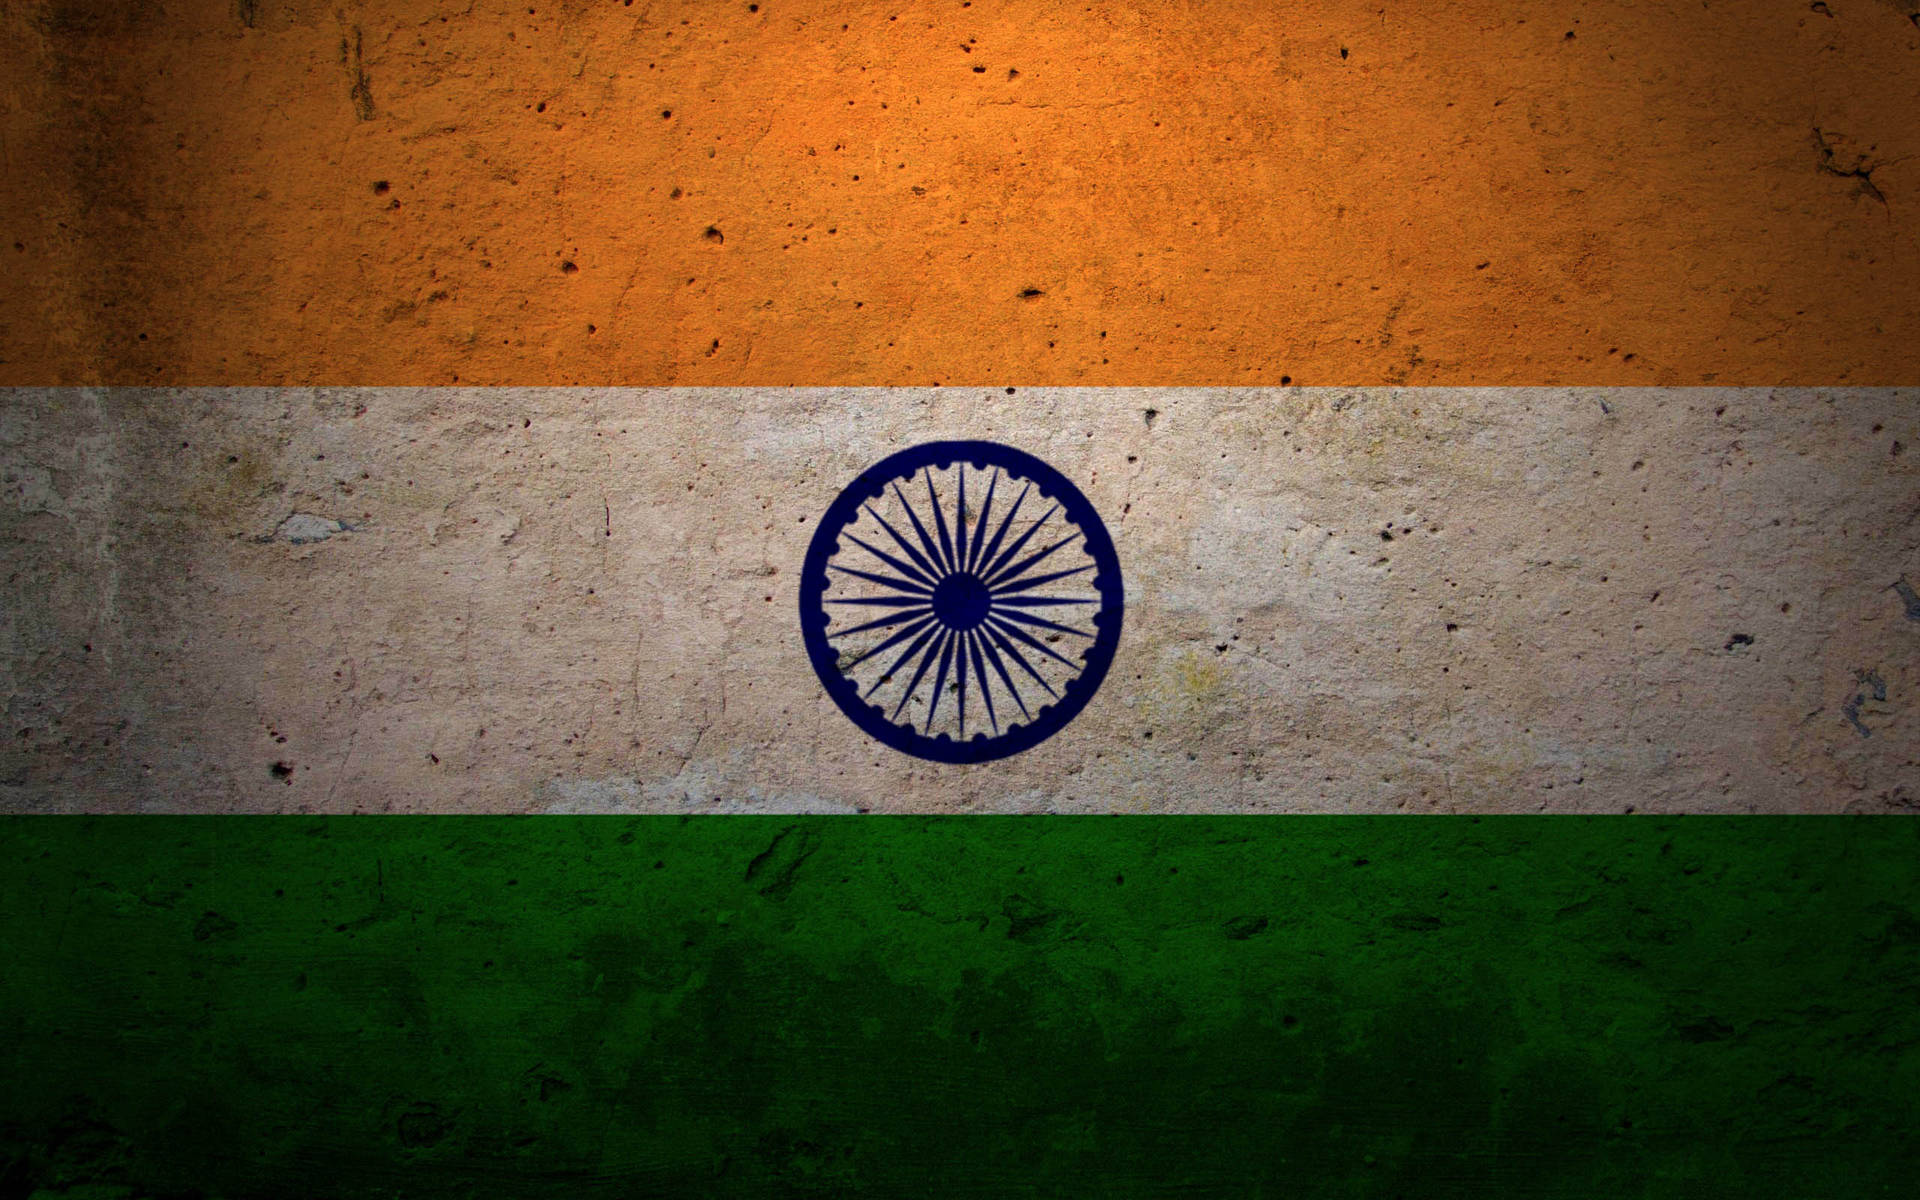 Indiskaflaggan Målad På Väggen. (note: This Translation Is The Literal Translation Of The Sentence. It May Not Be The Most Accurate Way To Describe A Computer Or Mobile Wallpaper With The Indian Flag.) Wallpaper